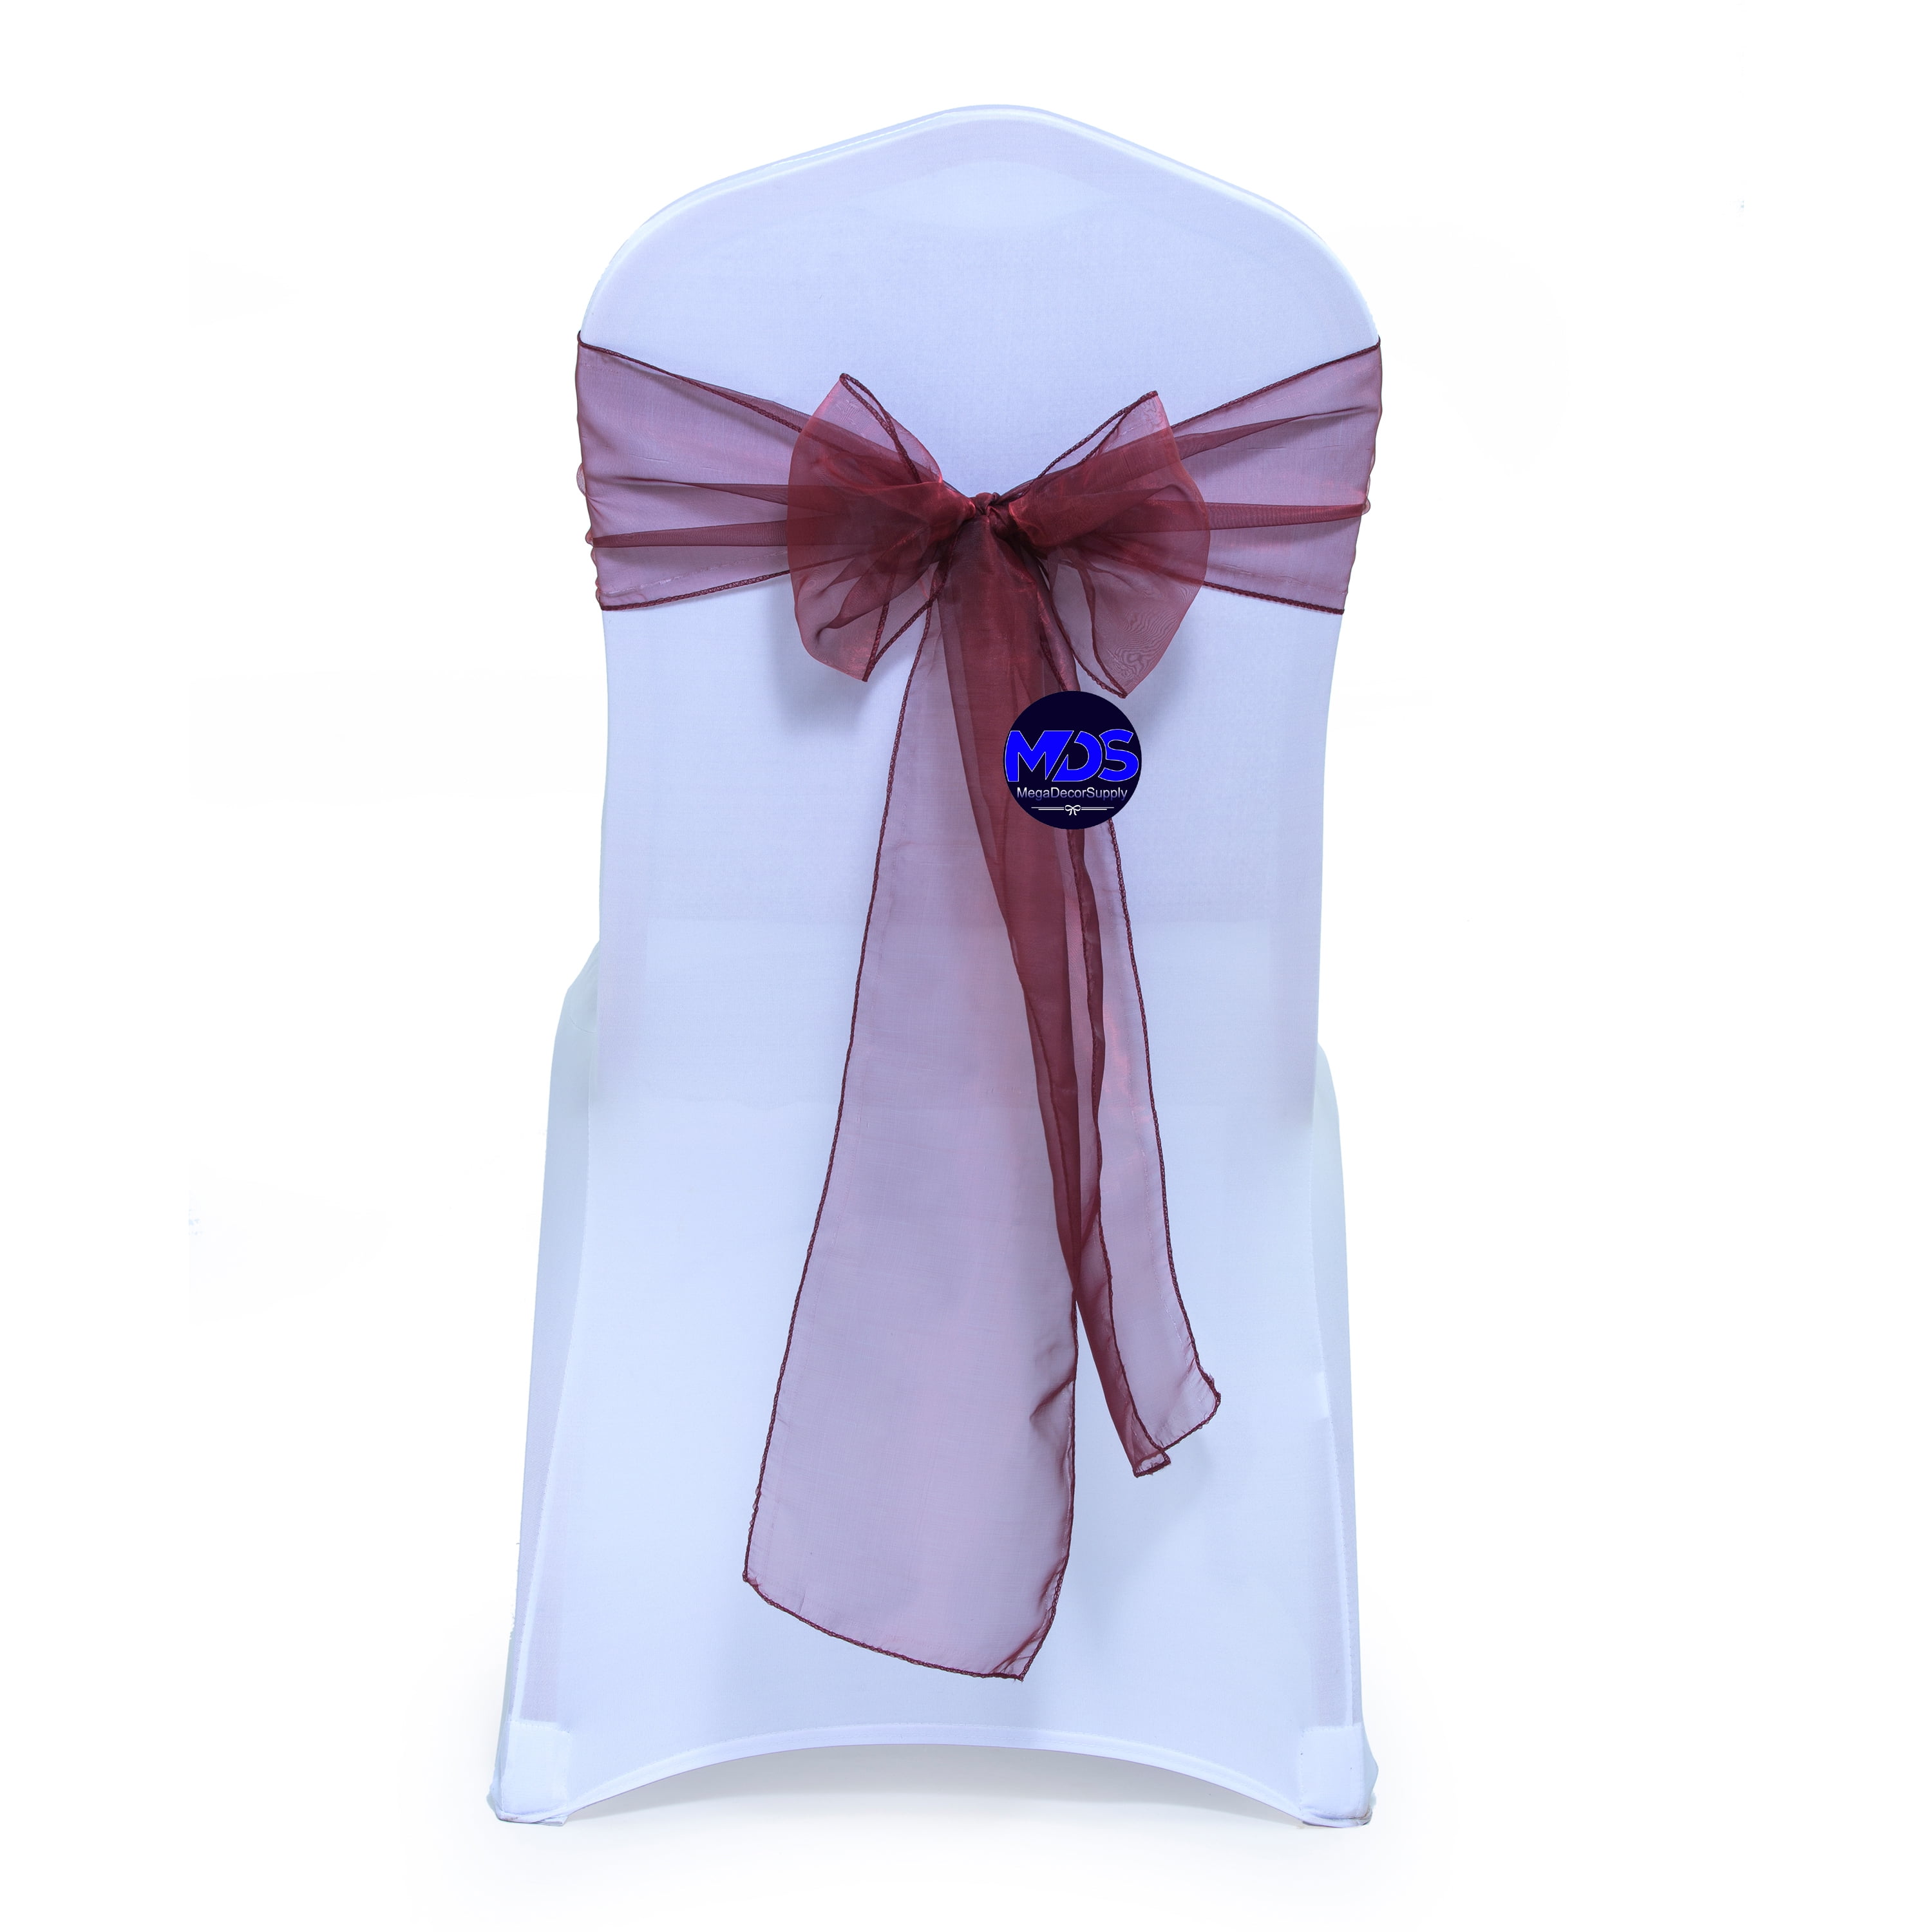 PACK OF 200 SATIN CHAIR COVER BOW SASH FOR WEDDING WHOLESALE AVAILABLE PARTY 